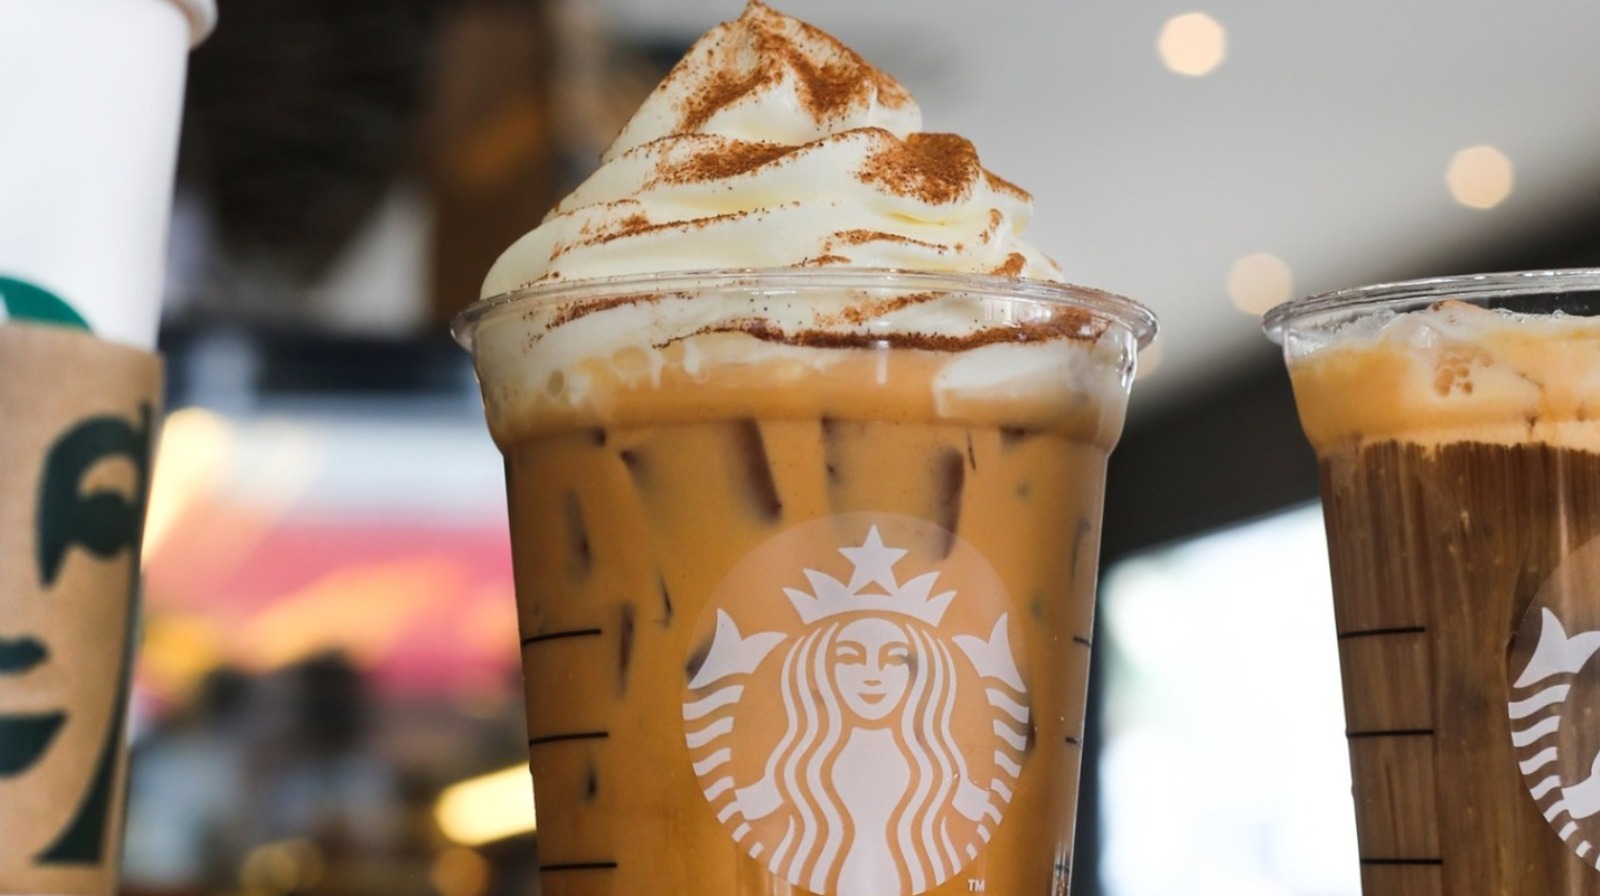 Could A PSL Shortage Be Coming To Starbucks?